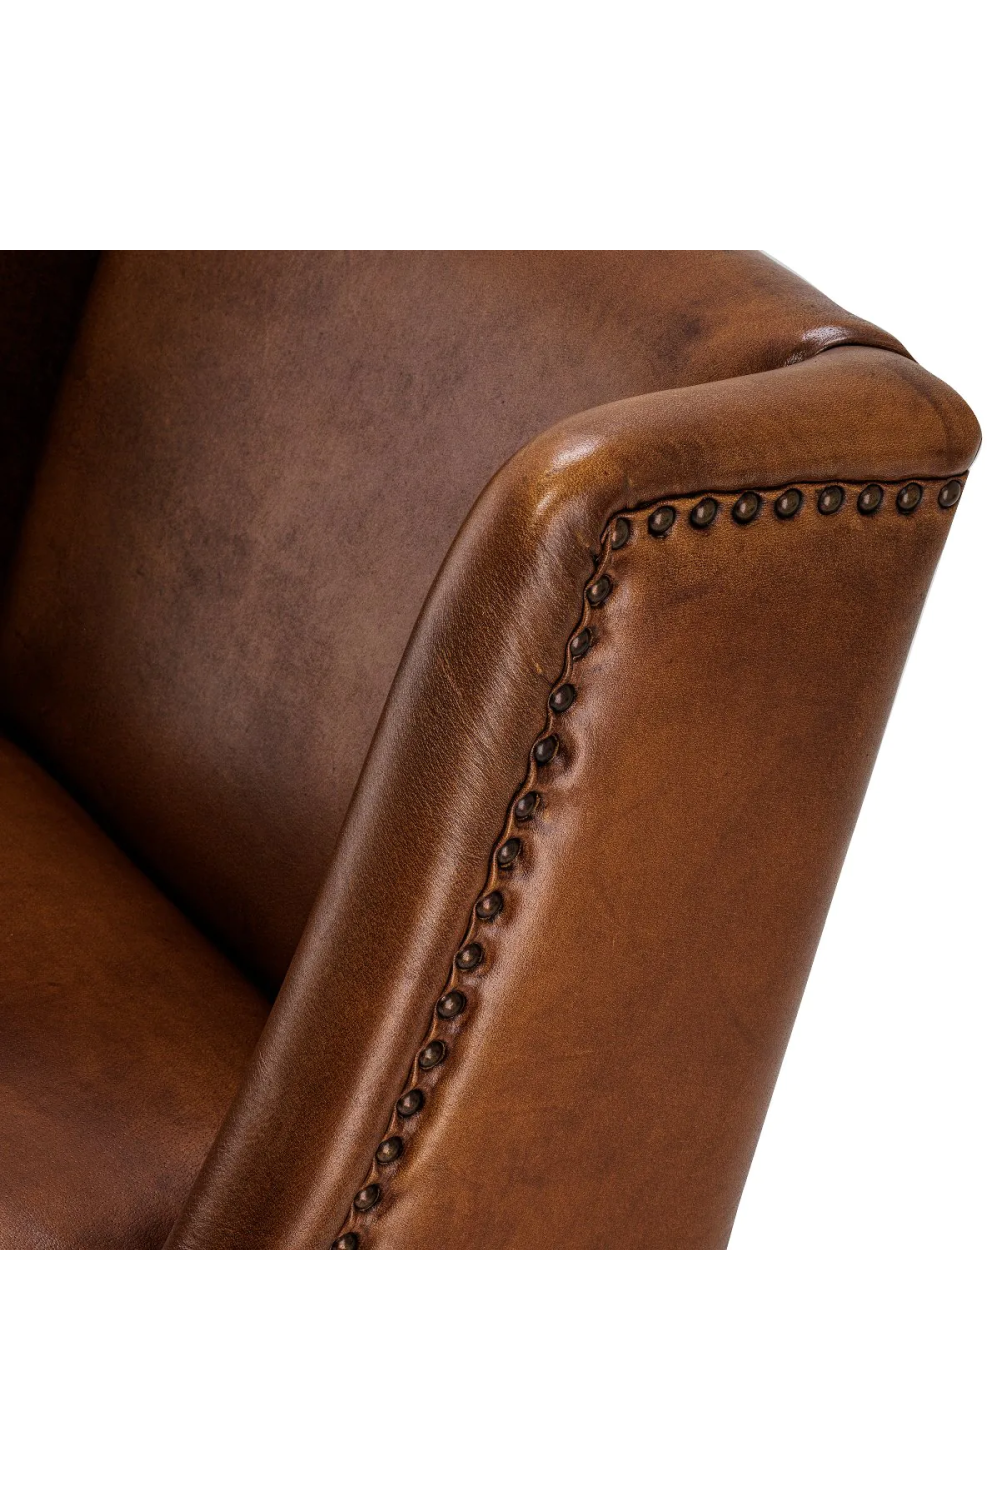 Tobacco Leather Dining Chair | Eichholtz St. James | Oroa.com